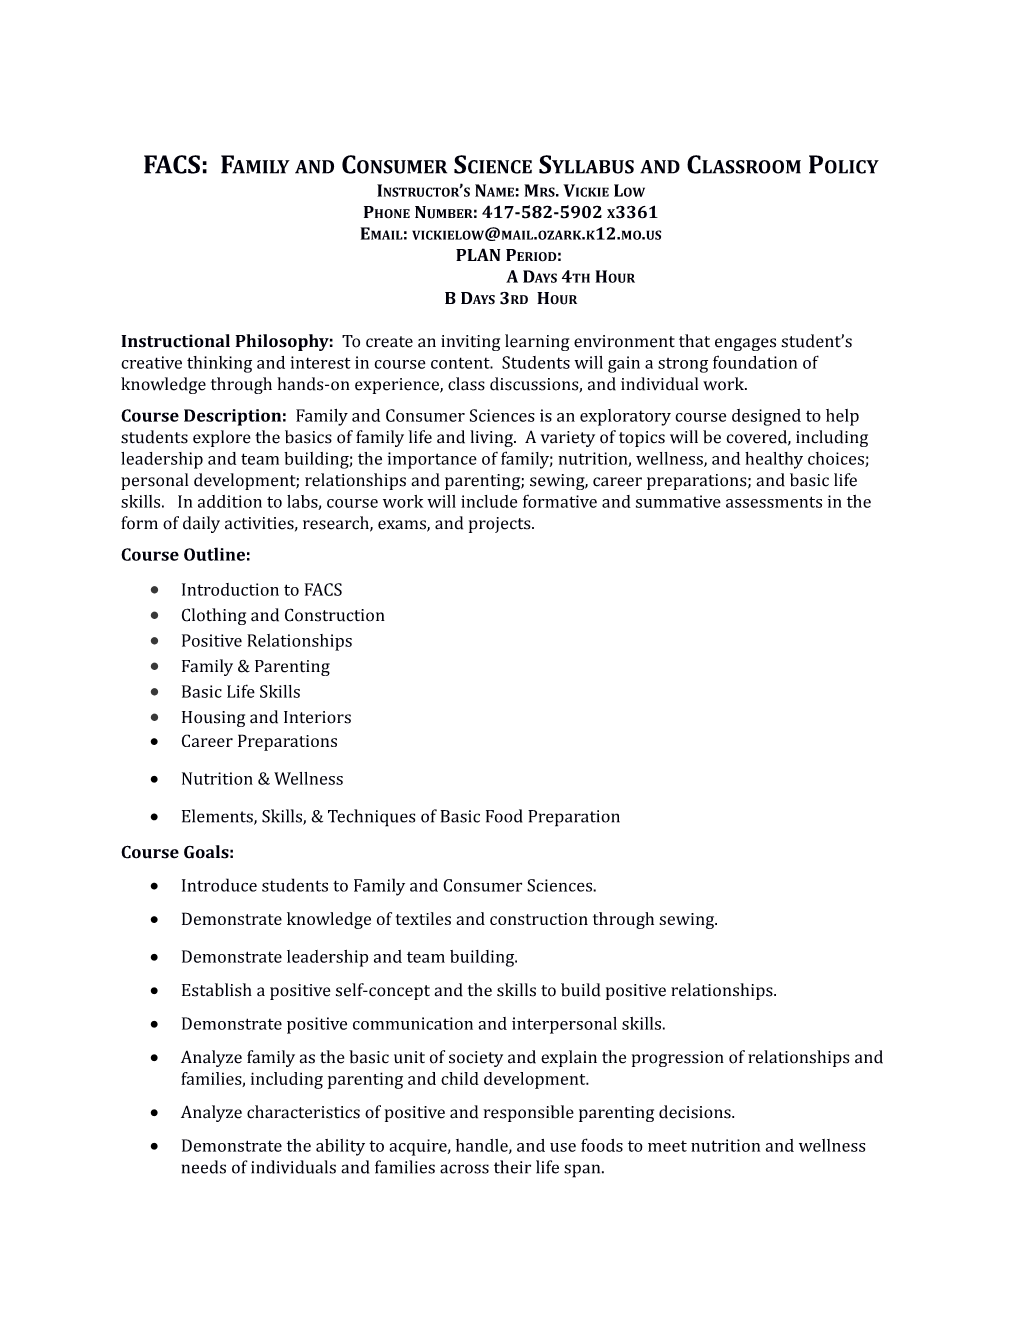 FACS: Family and Consumer Science Syllabus and Classroom Policy